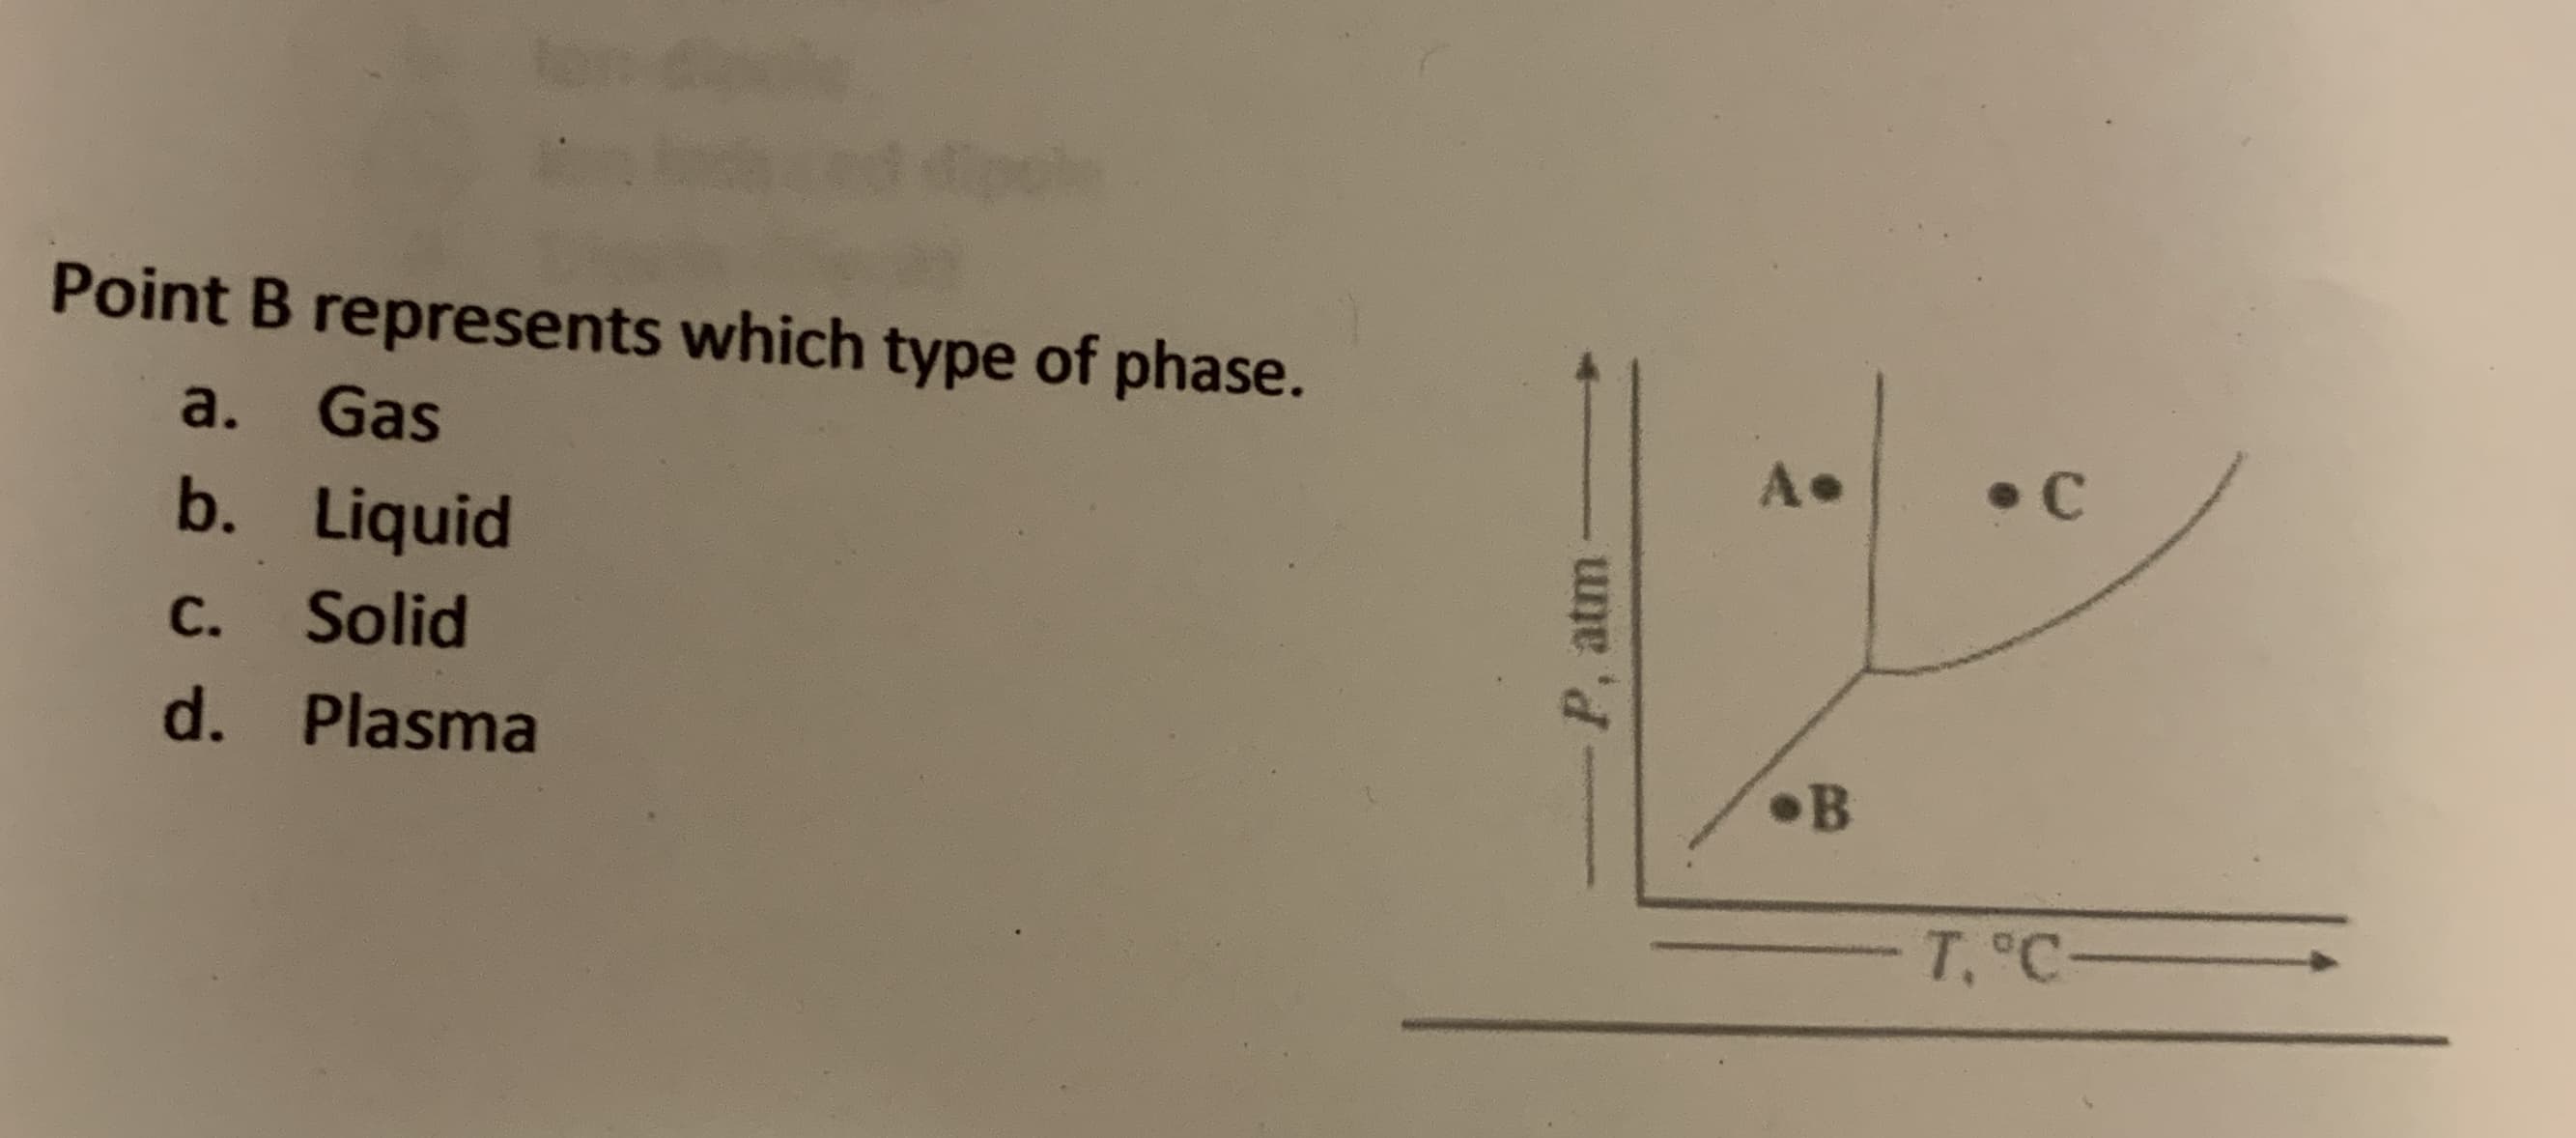 Point B represents which type of phase.
a.
Gas
A•
• C
b. Liquid
С.
Solid
d. Plasma
•B
T, C-
P, atm
